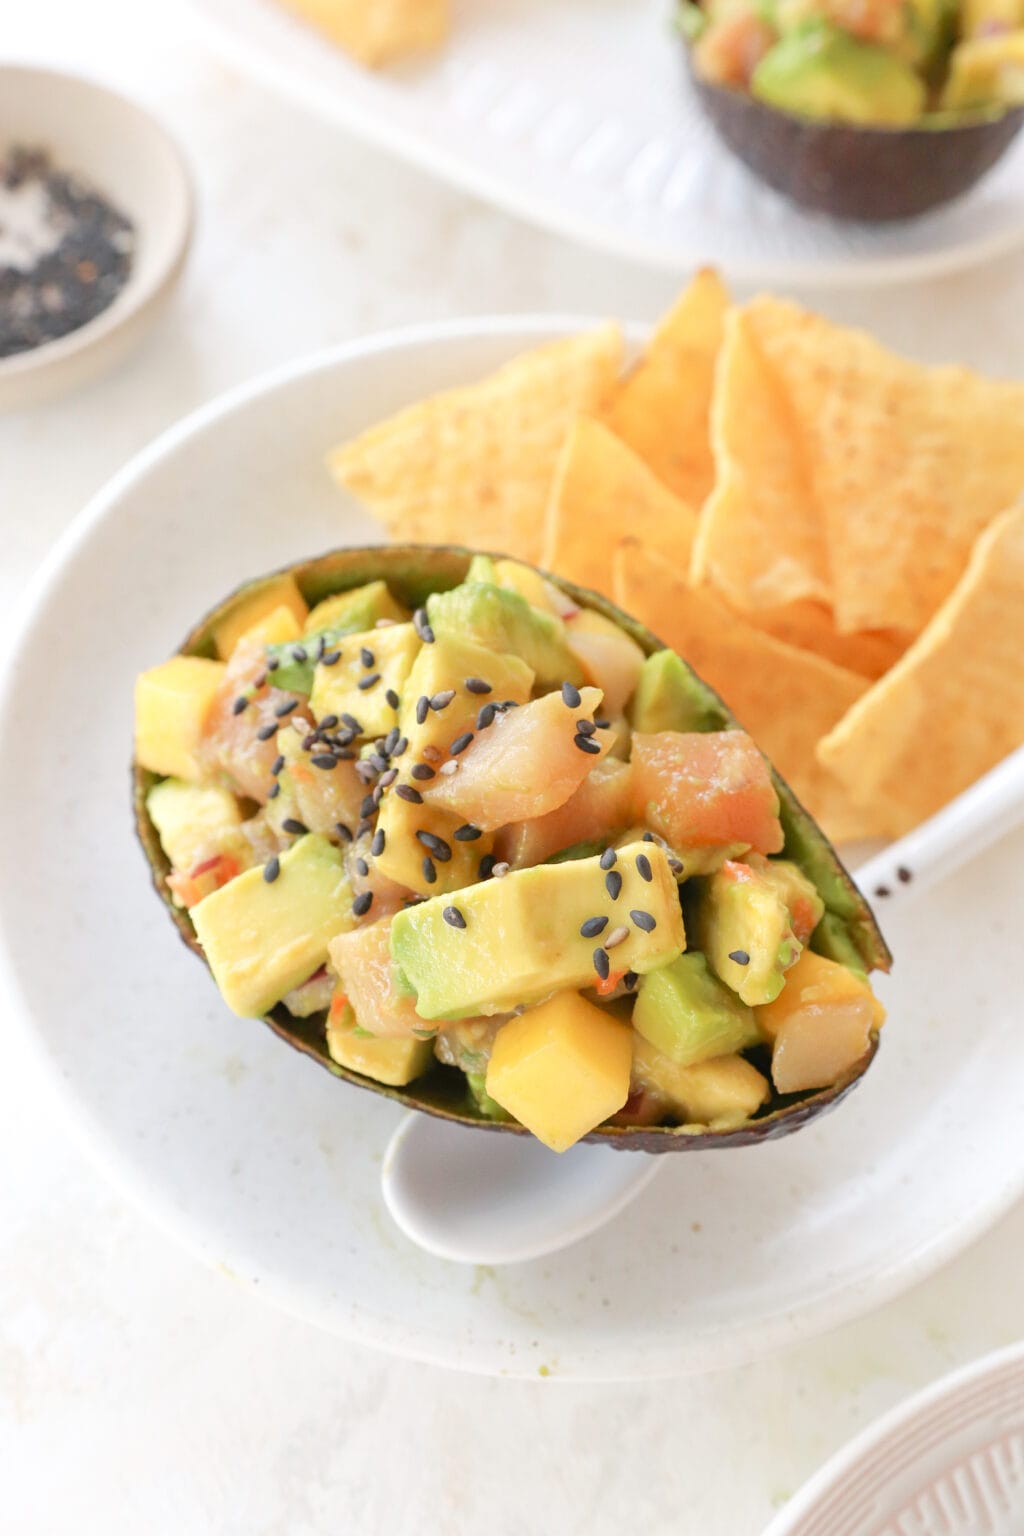 A white plate with an avocado shell filled with cubed avocado, mango and habanero salsa, and cubed tuna. Beside it are some tortilla chips and a white spoon.